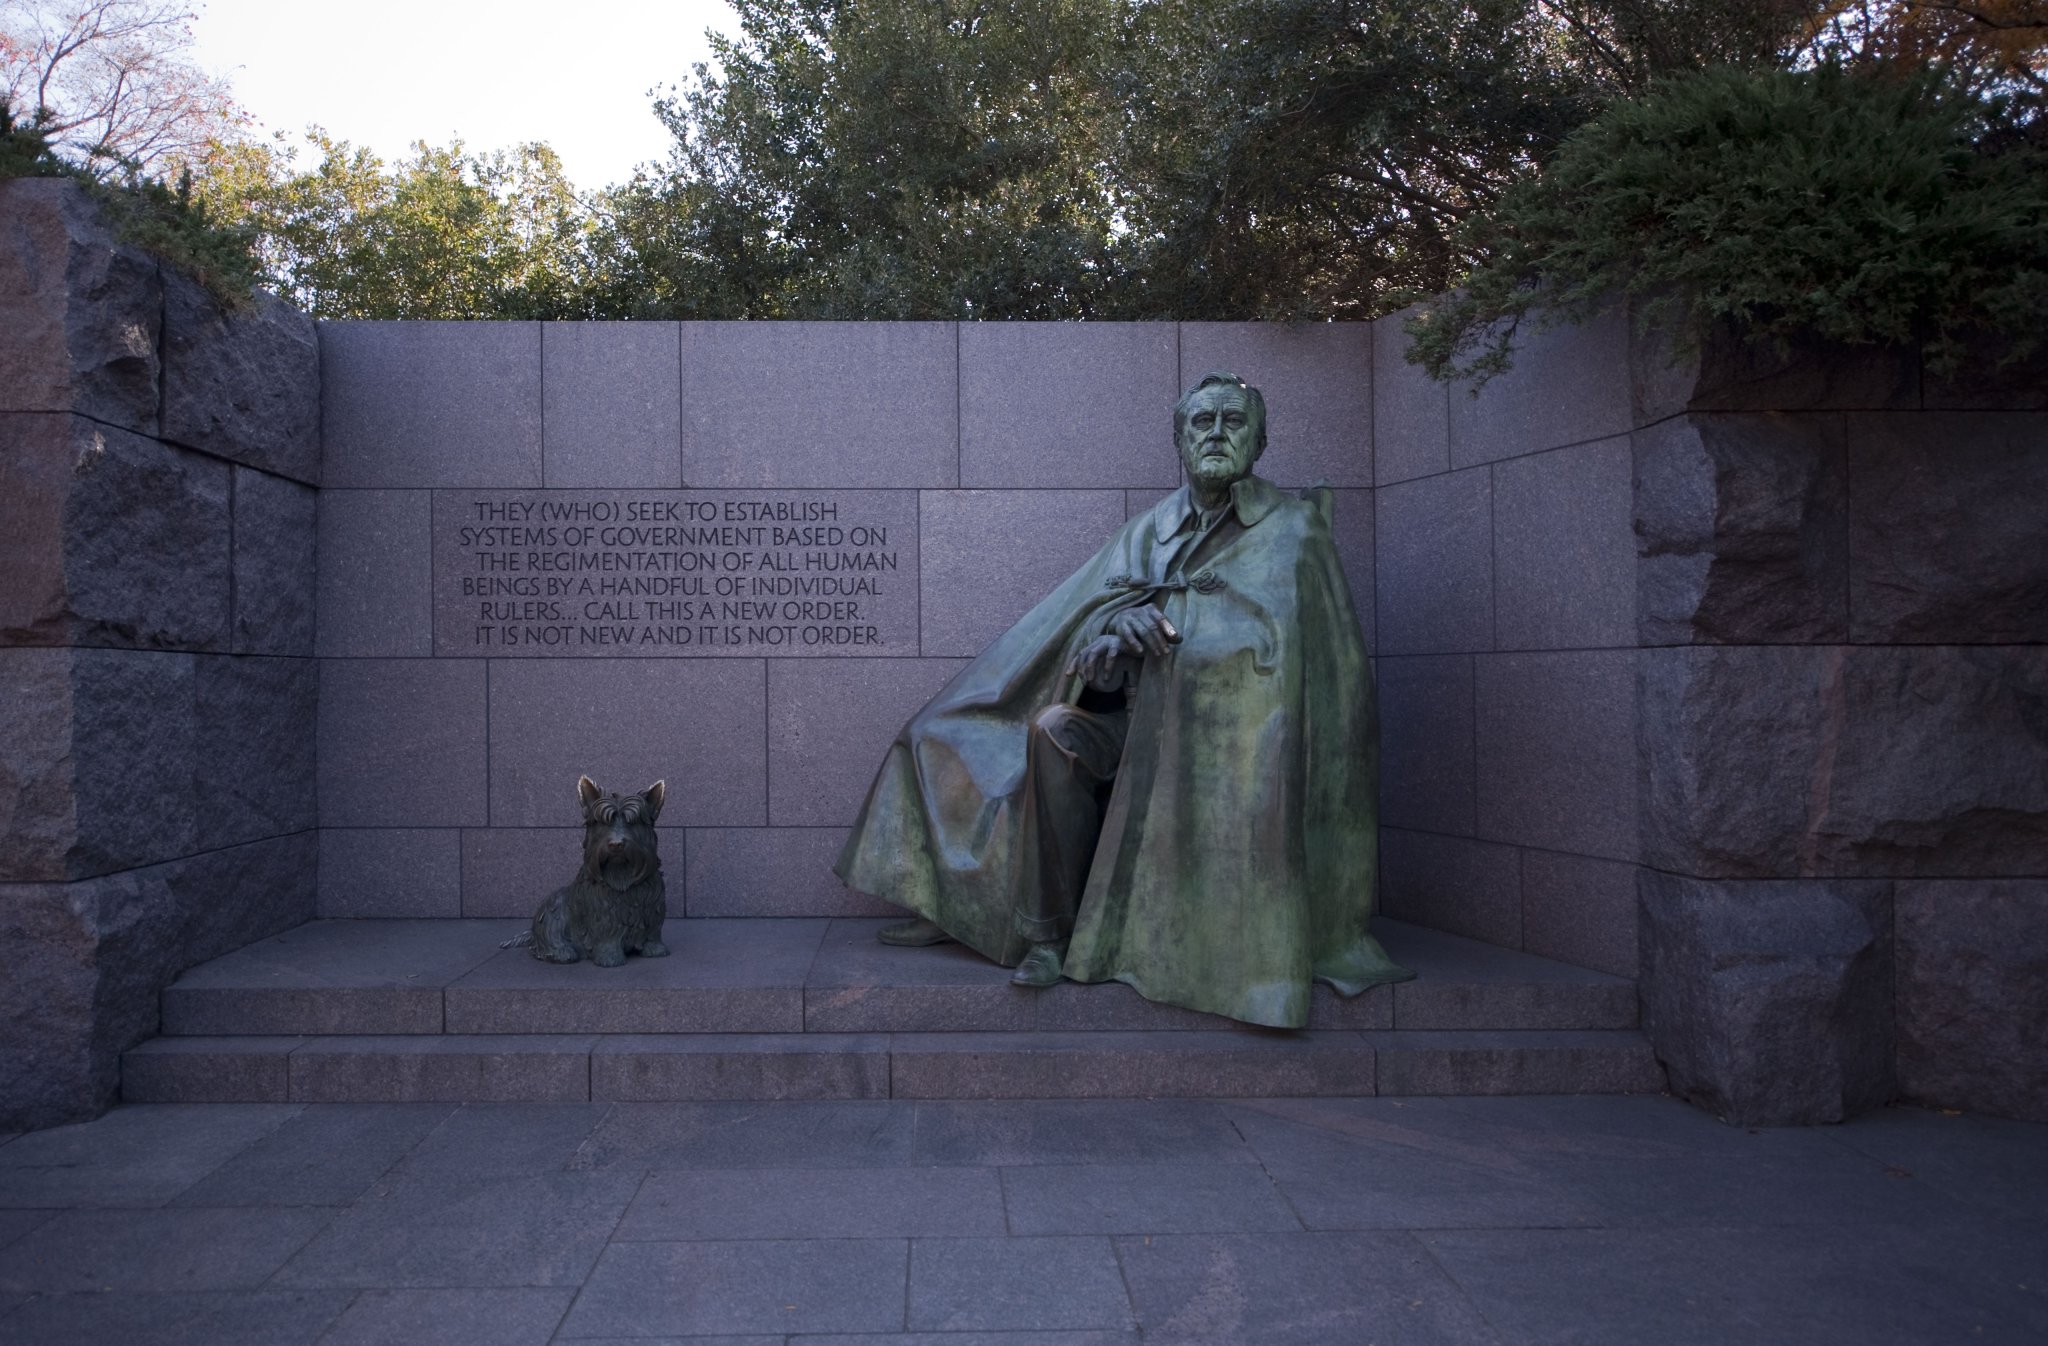 The Complete Guide to the FDR Memorial in Washington, D.C.